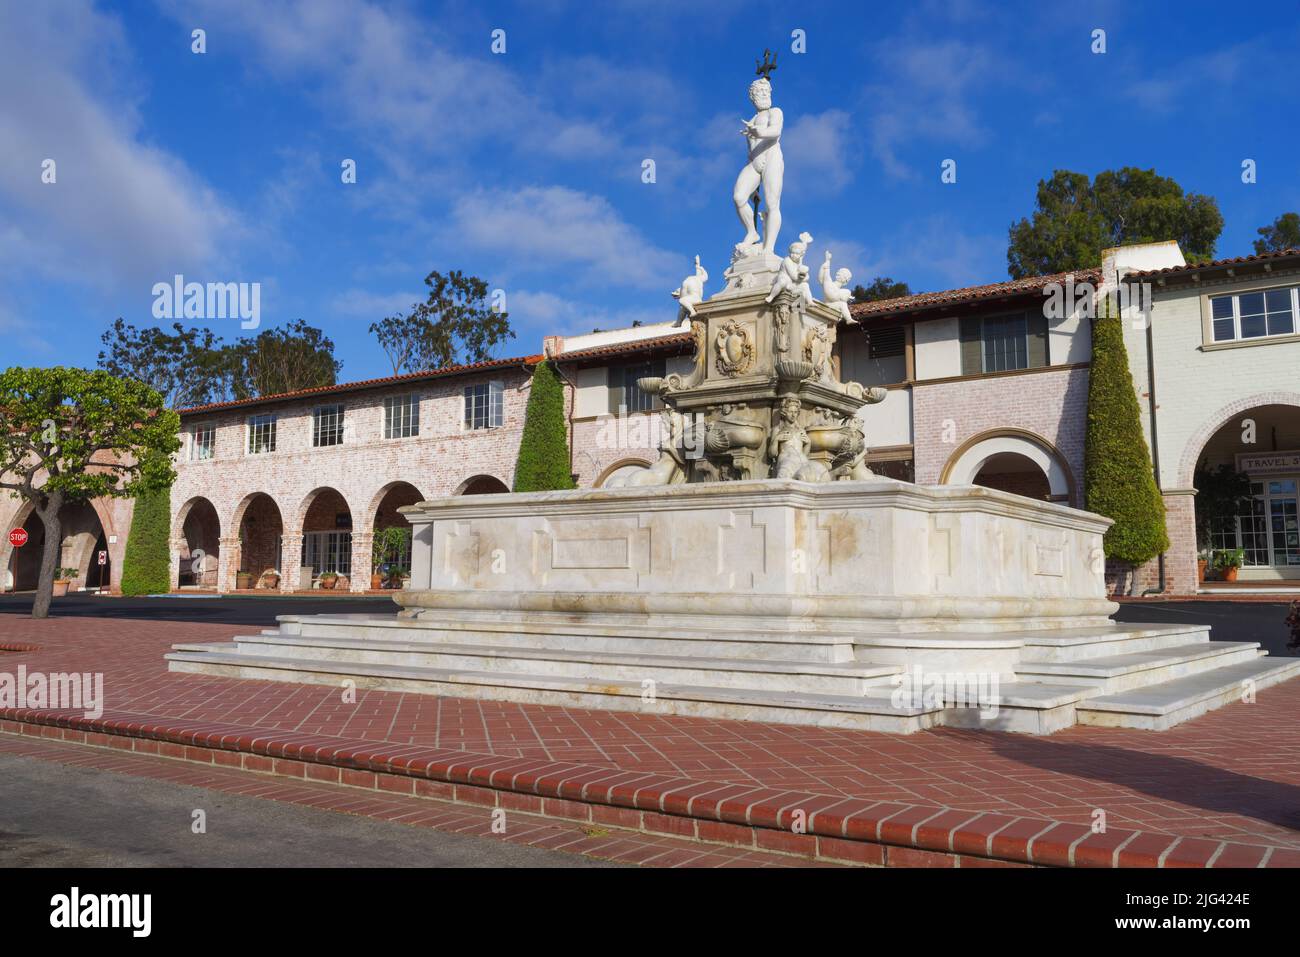 INeptune Fountain at the Malaga Cove Plaza during a sunny day shown in Palos Verdes Estate, Los Angeles County, California. Stock Photo